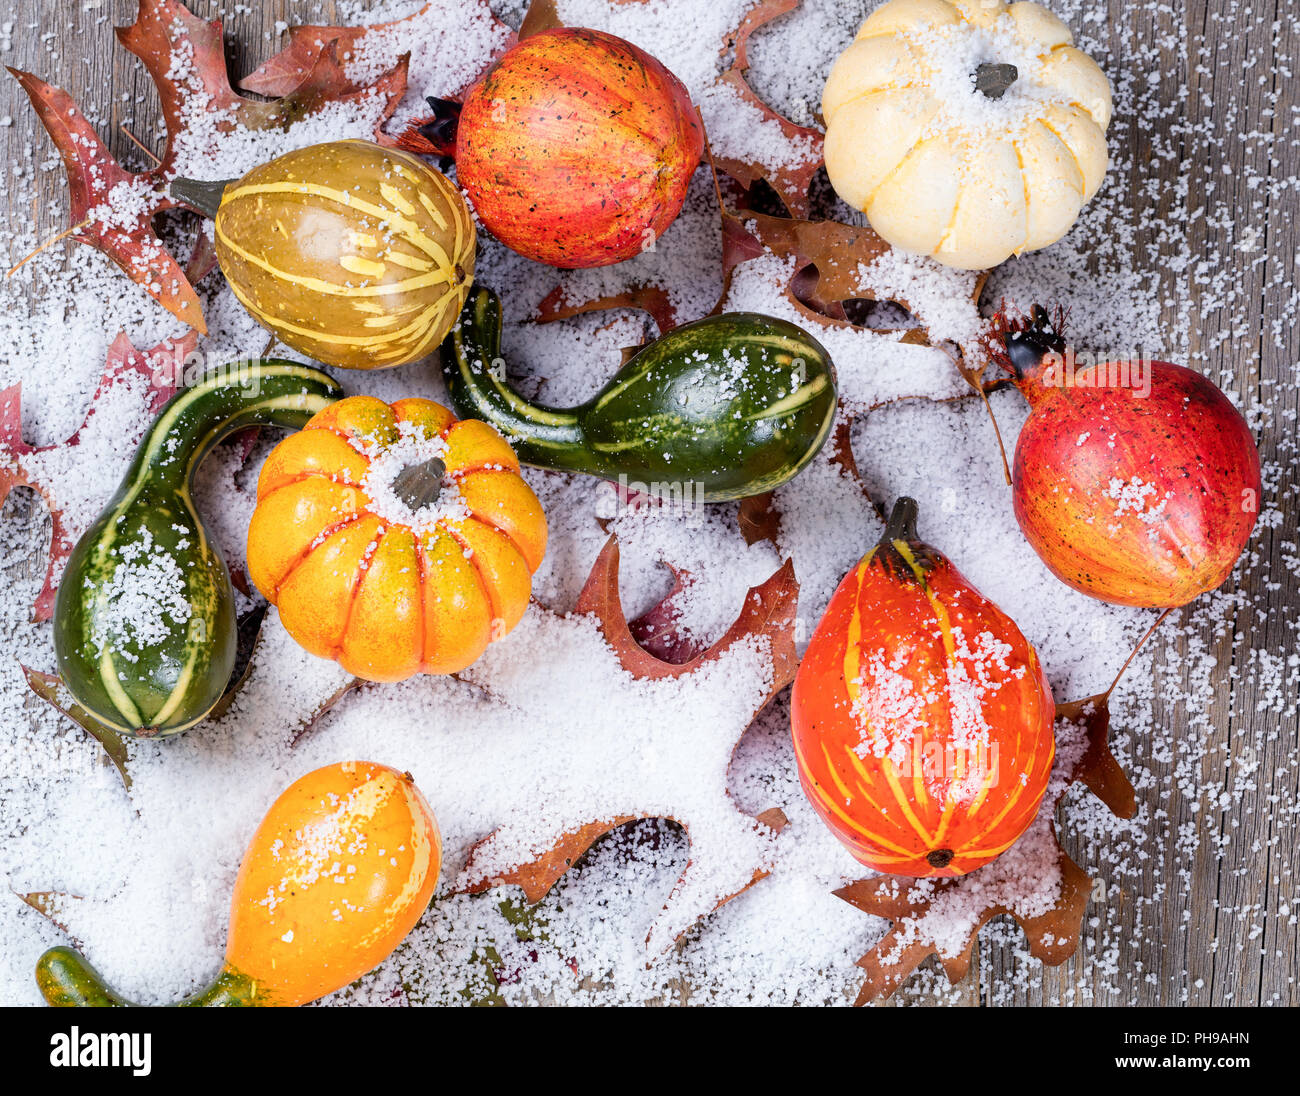 Early snow with autumn gourds and leaves on wood Stock Photo